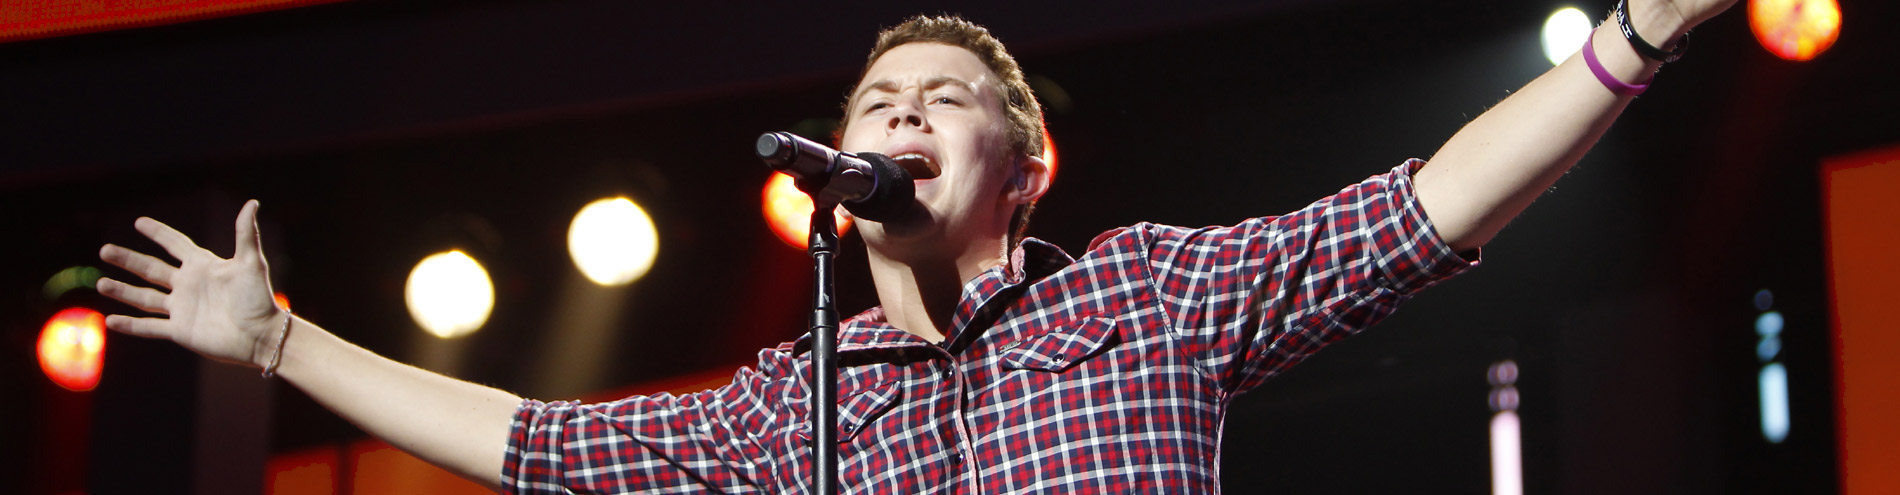 Scotty McCreery Live Concert Tickets